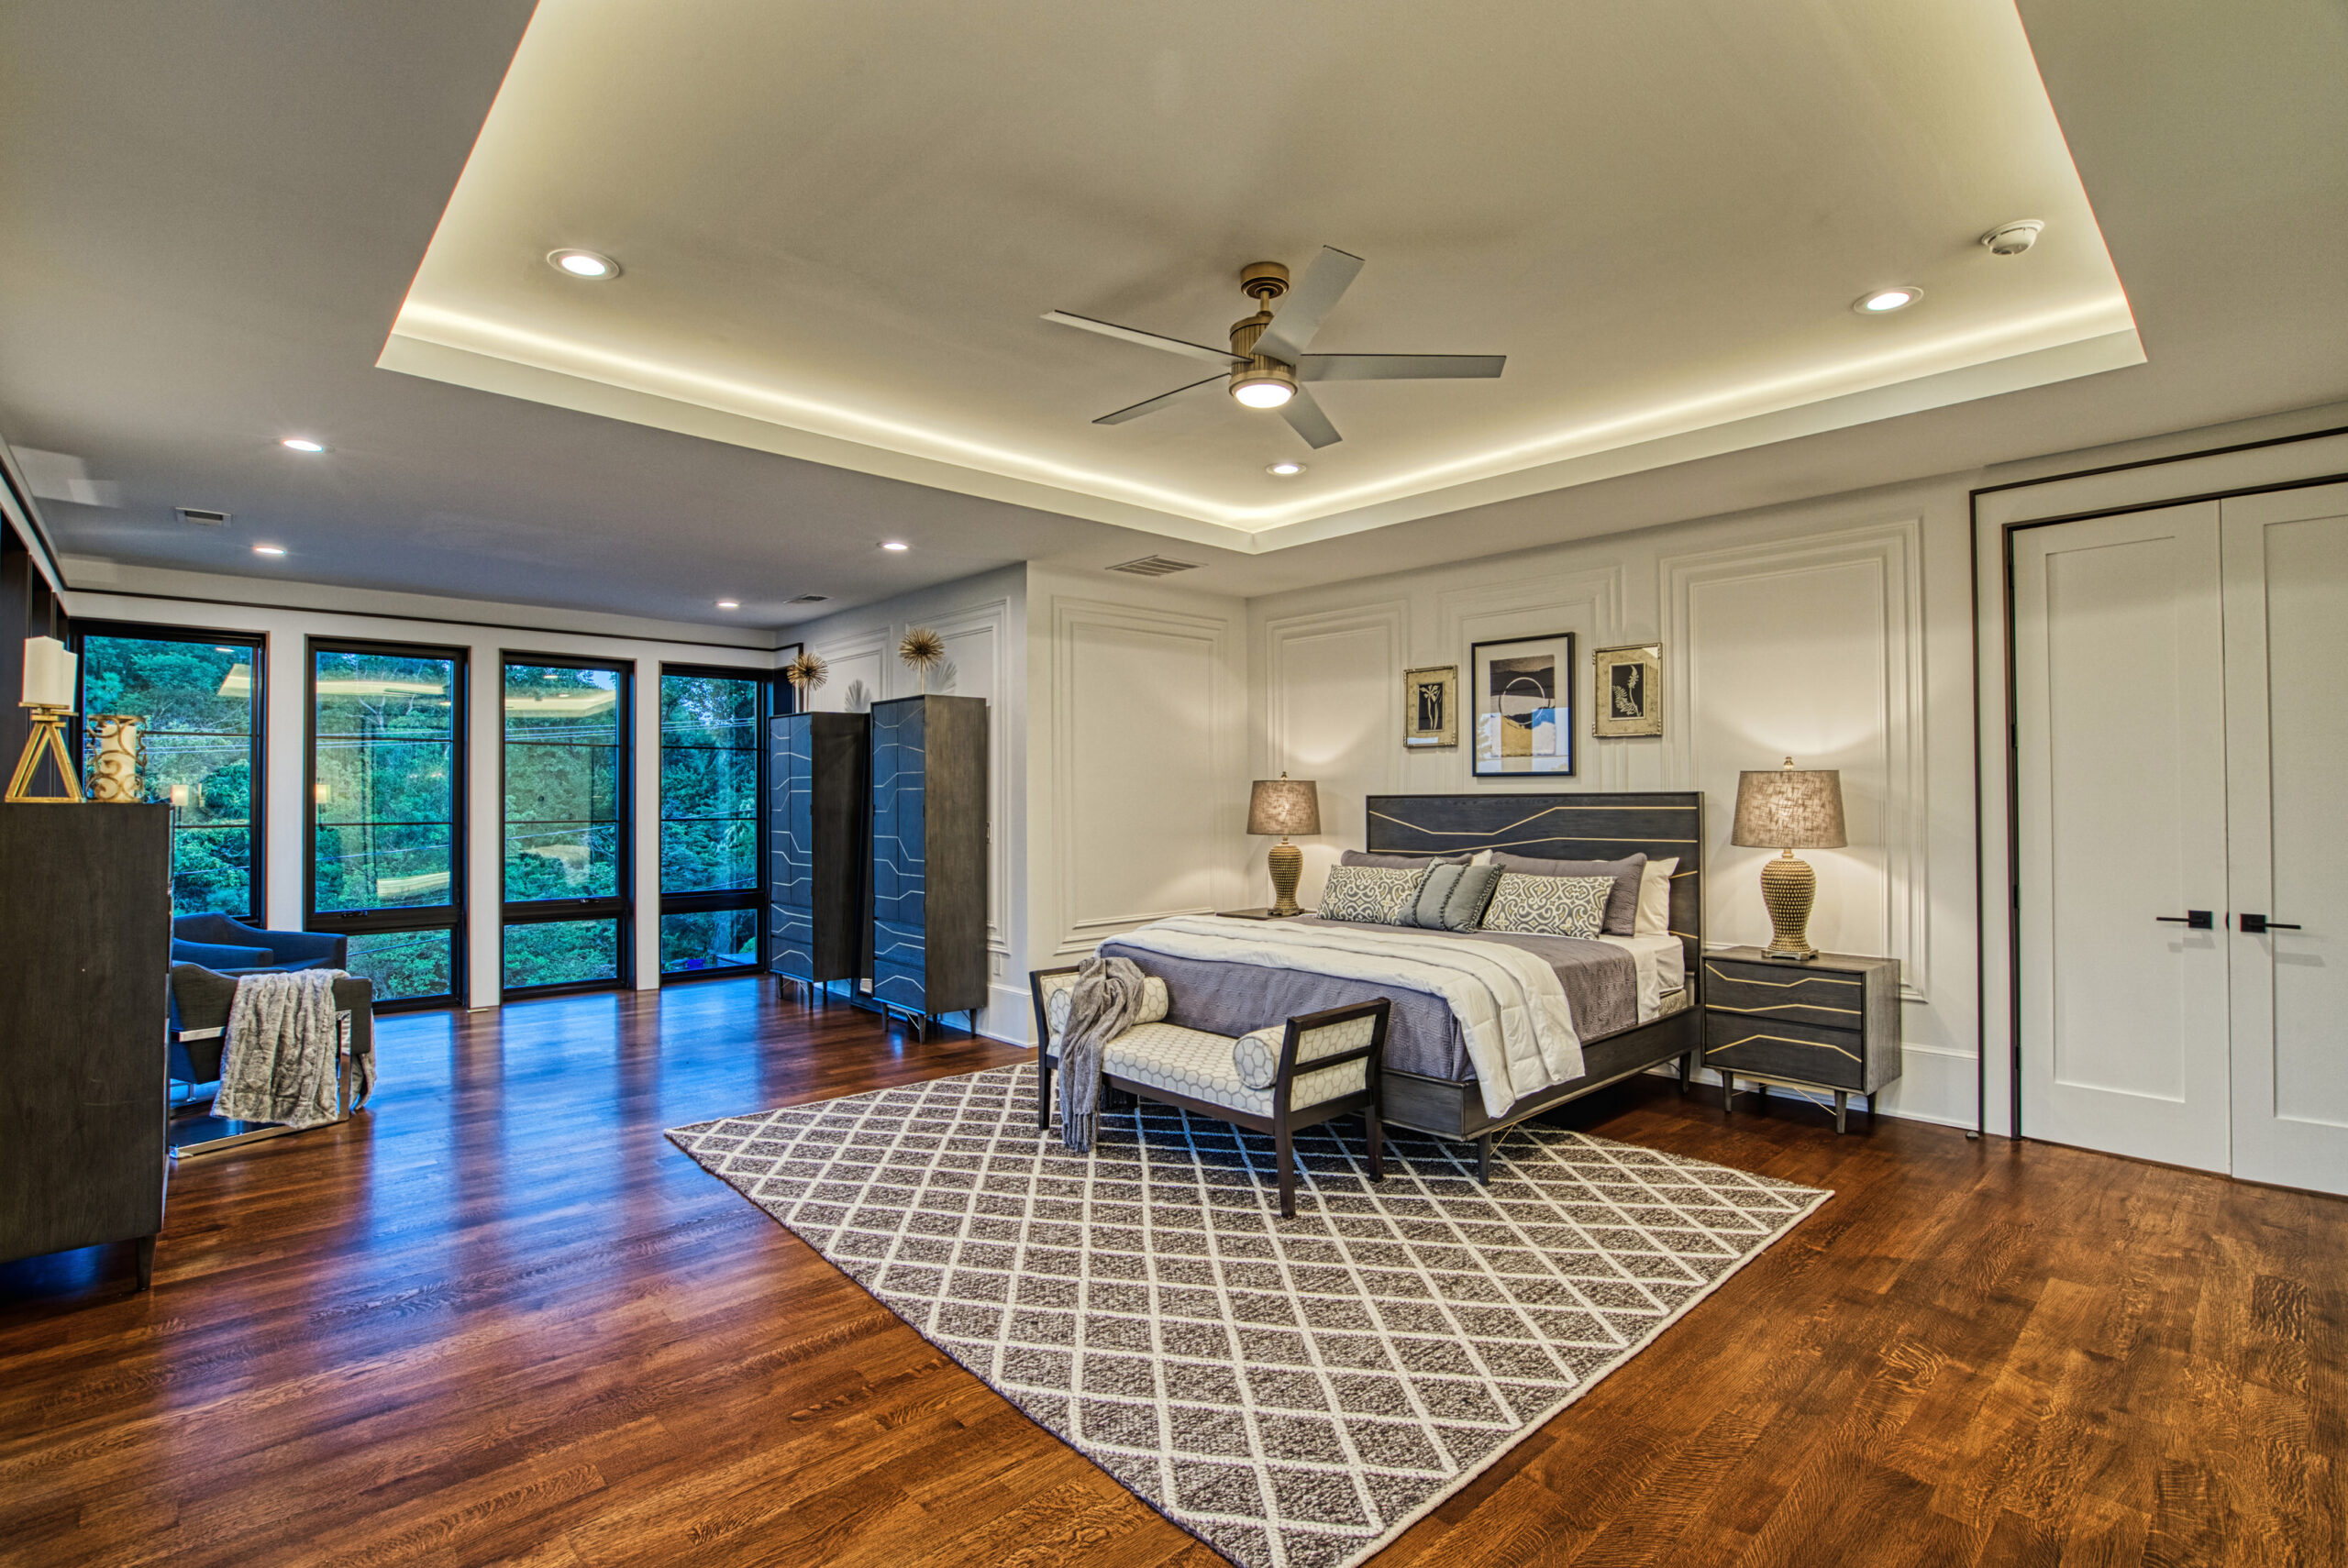 Master bedroom in modern luxury new construction home with huge tray ceiling, custom hardwood floors, and floor to ceiling windows.